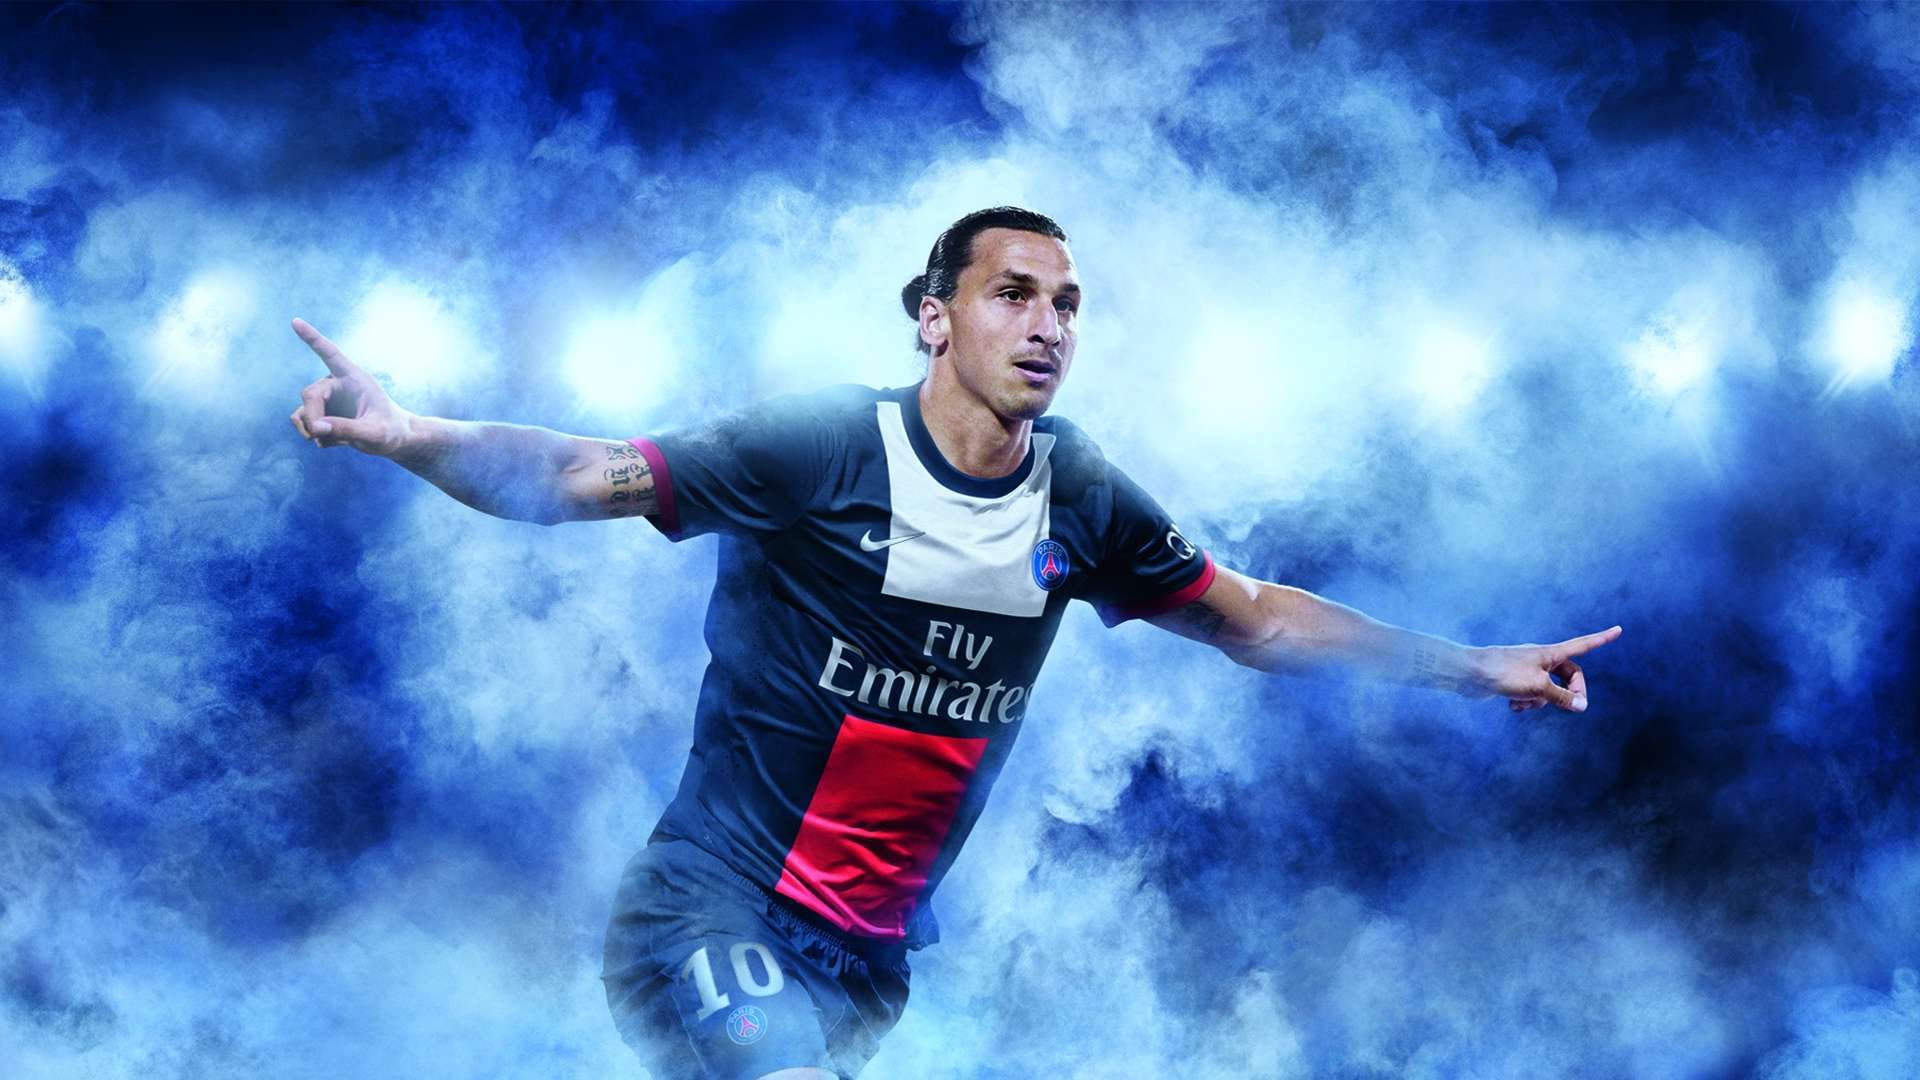 Gallery For gt Ibrahimovic Wallpaper